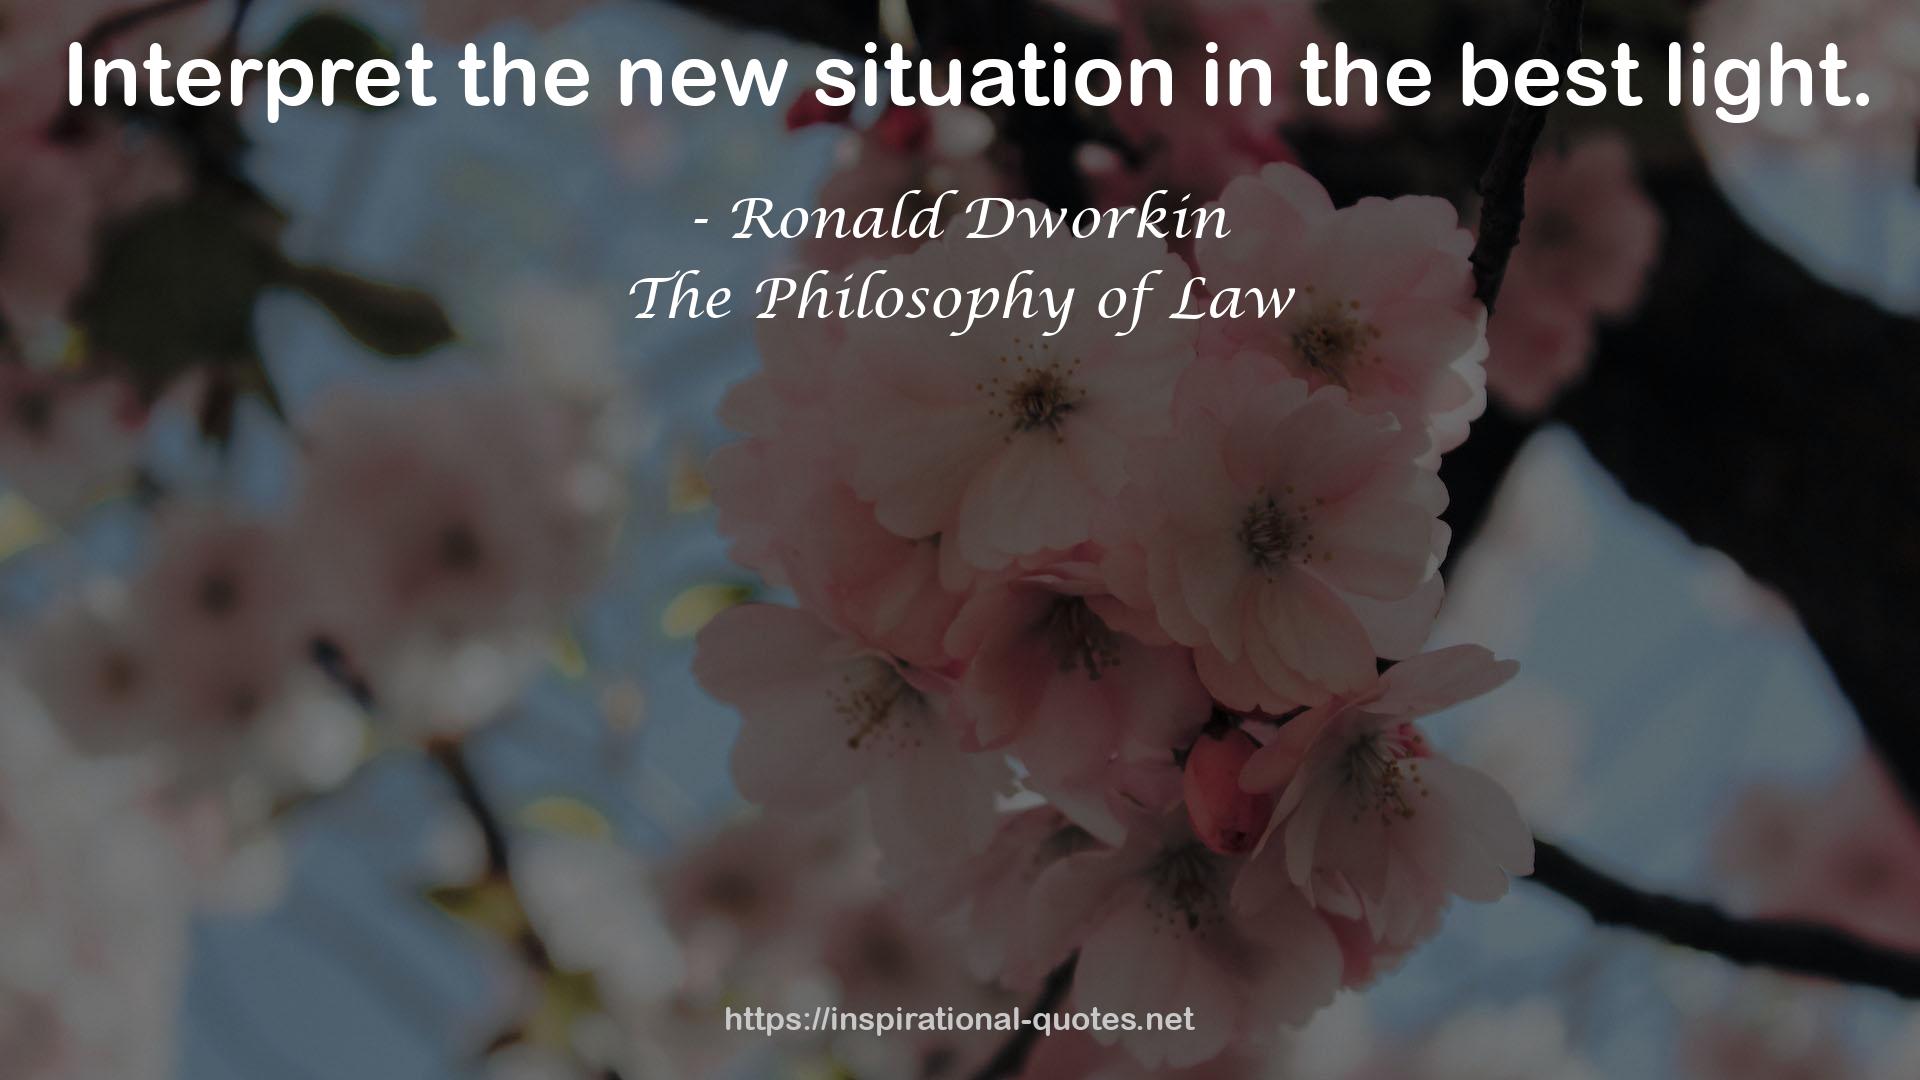 The Philosophy of Law QUOTES